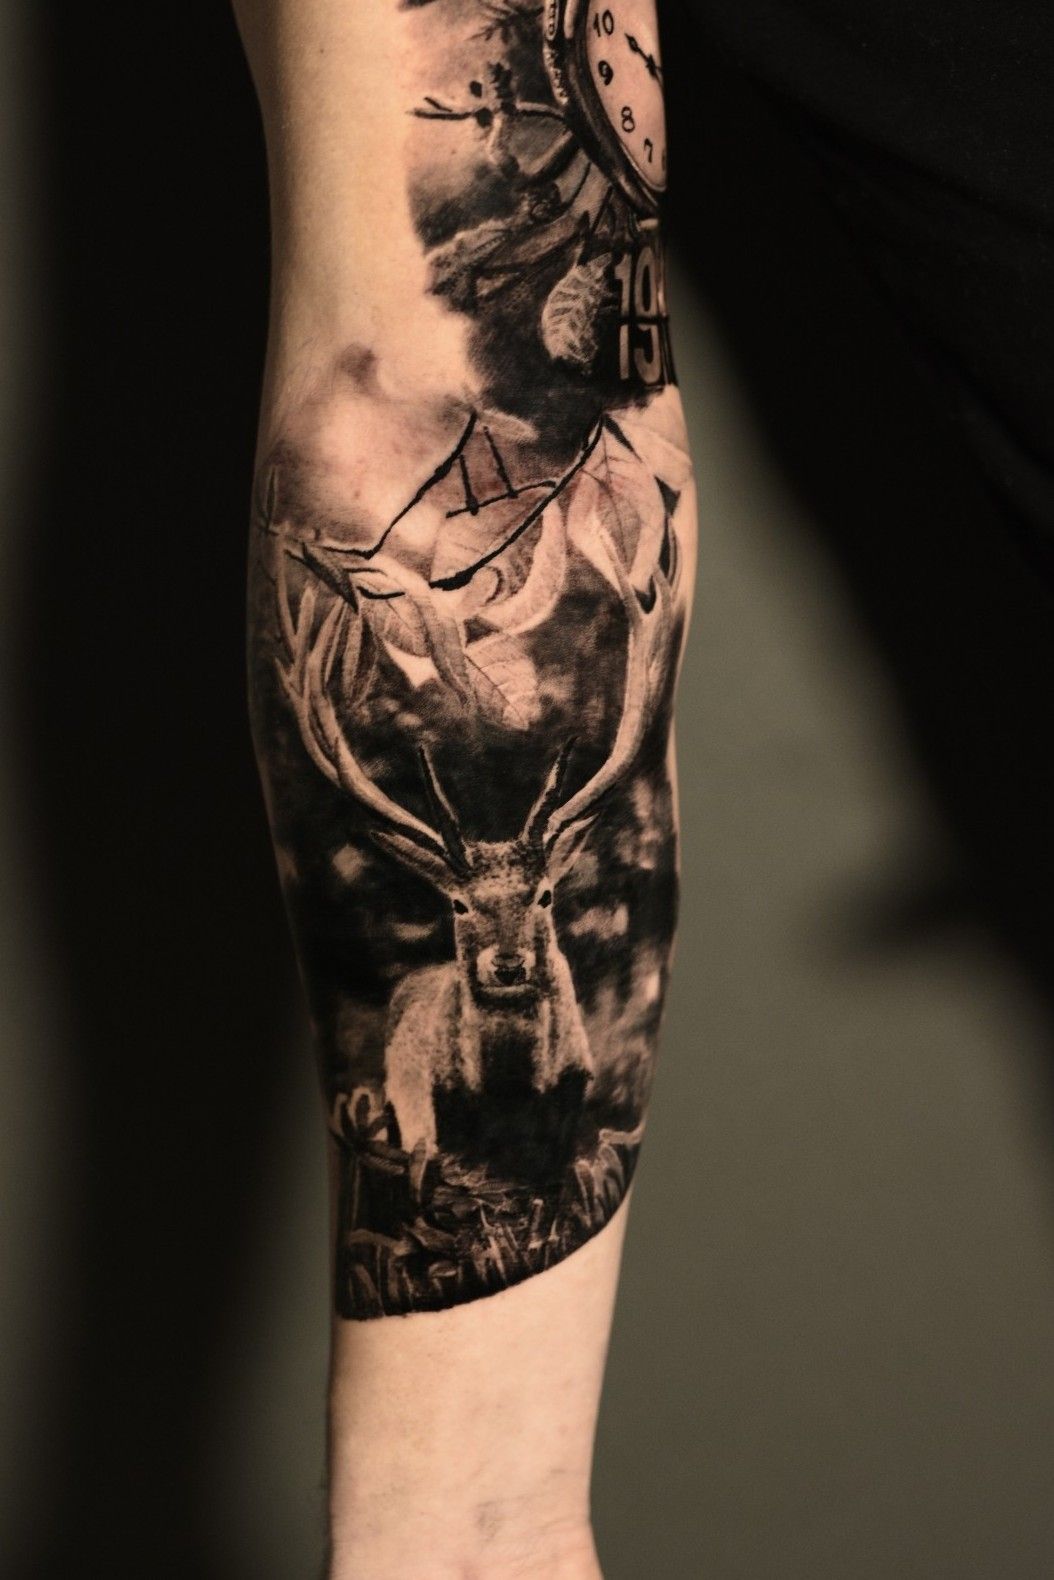 30 of the Best Hunting Tattoos We Could Find | Deer tattoo, Hunting tattoos,  Deer tattoo designs